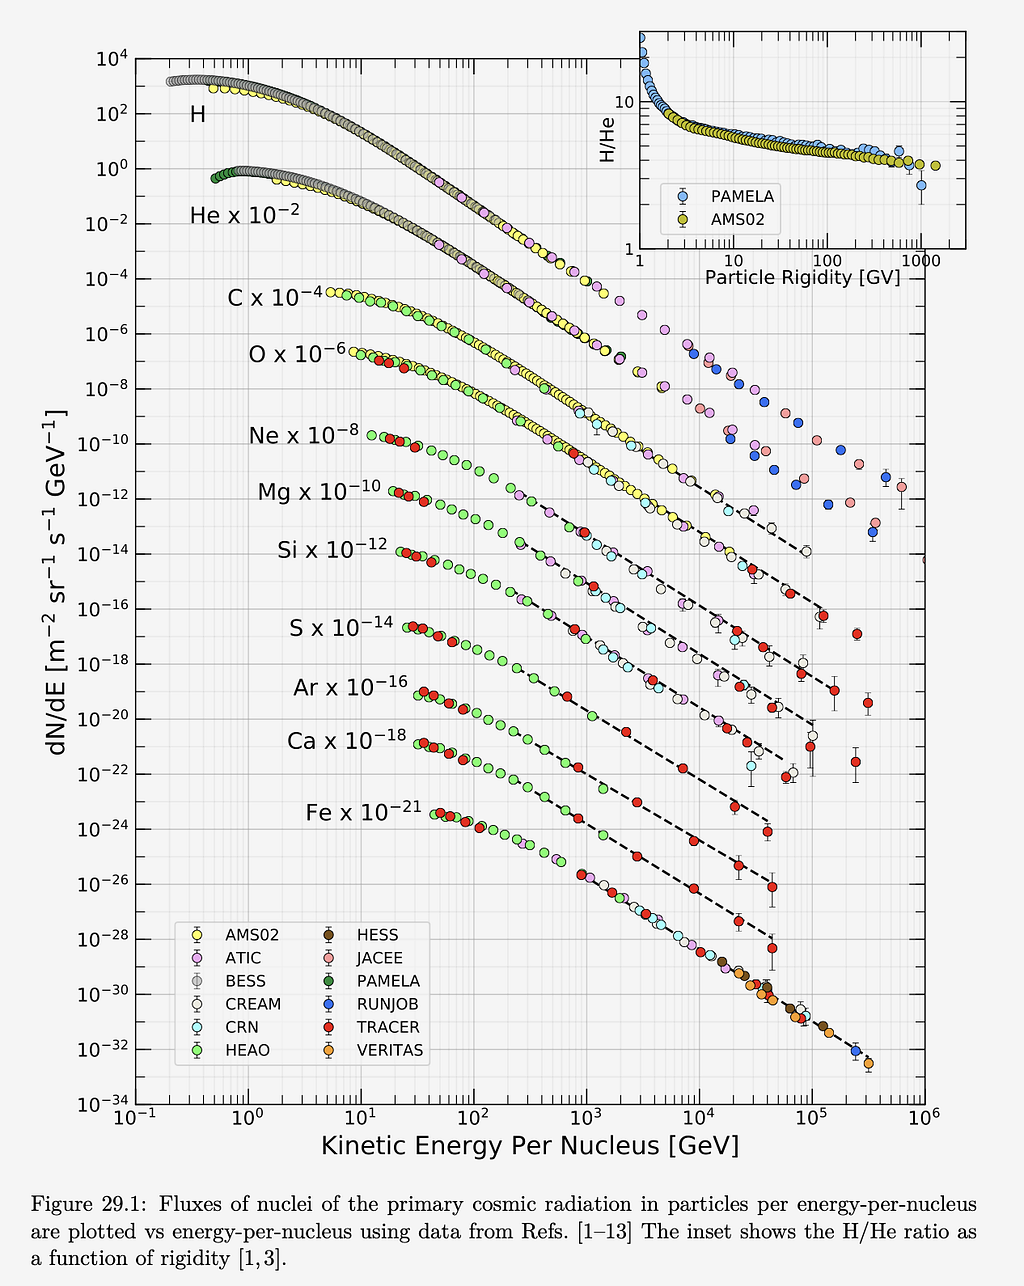 An extremely busy plot with data potns from over 10 experimental groups highlighed by different colored and shaped bullets, ranging from circles to diamonds. Each feature is a power law with a slight curve at the top. The y-axis is particle flux, with protons being the dominate source near the top. Other nuclei of heavier elements follow their own homologous lines, but are scale by integral factors of 10 to be included nicely in this plot.